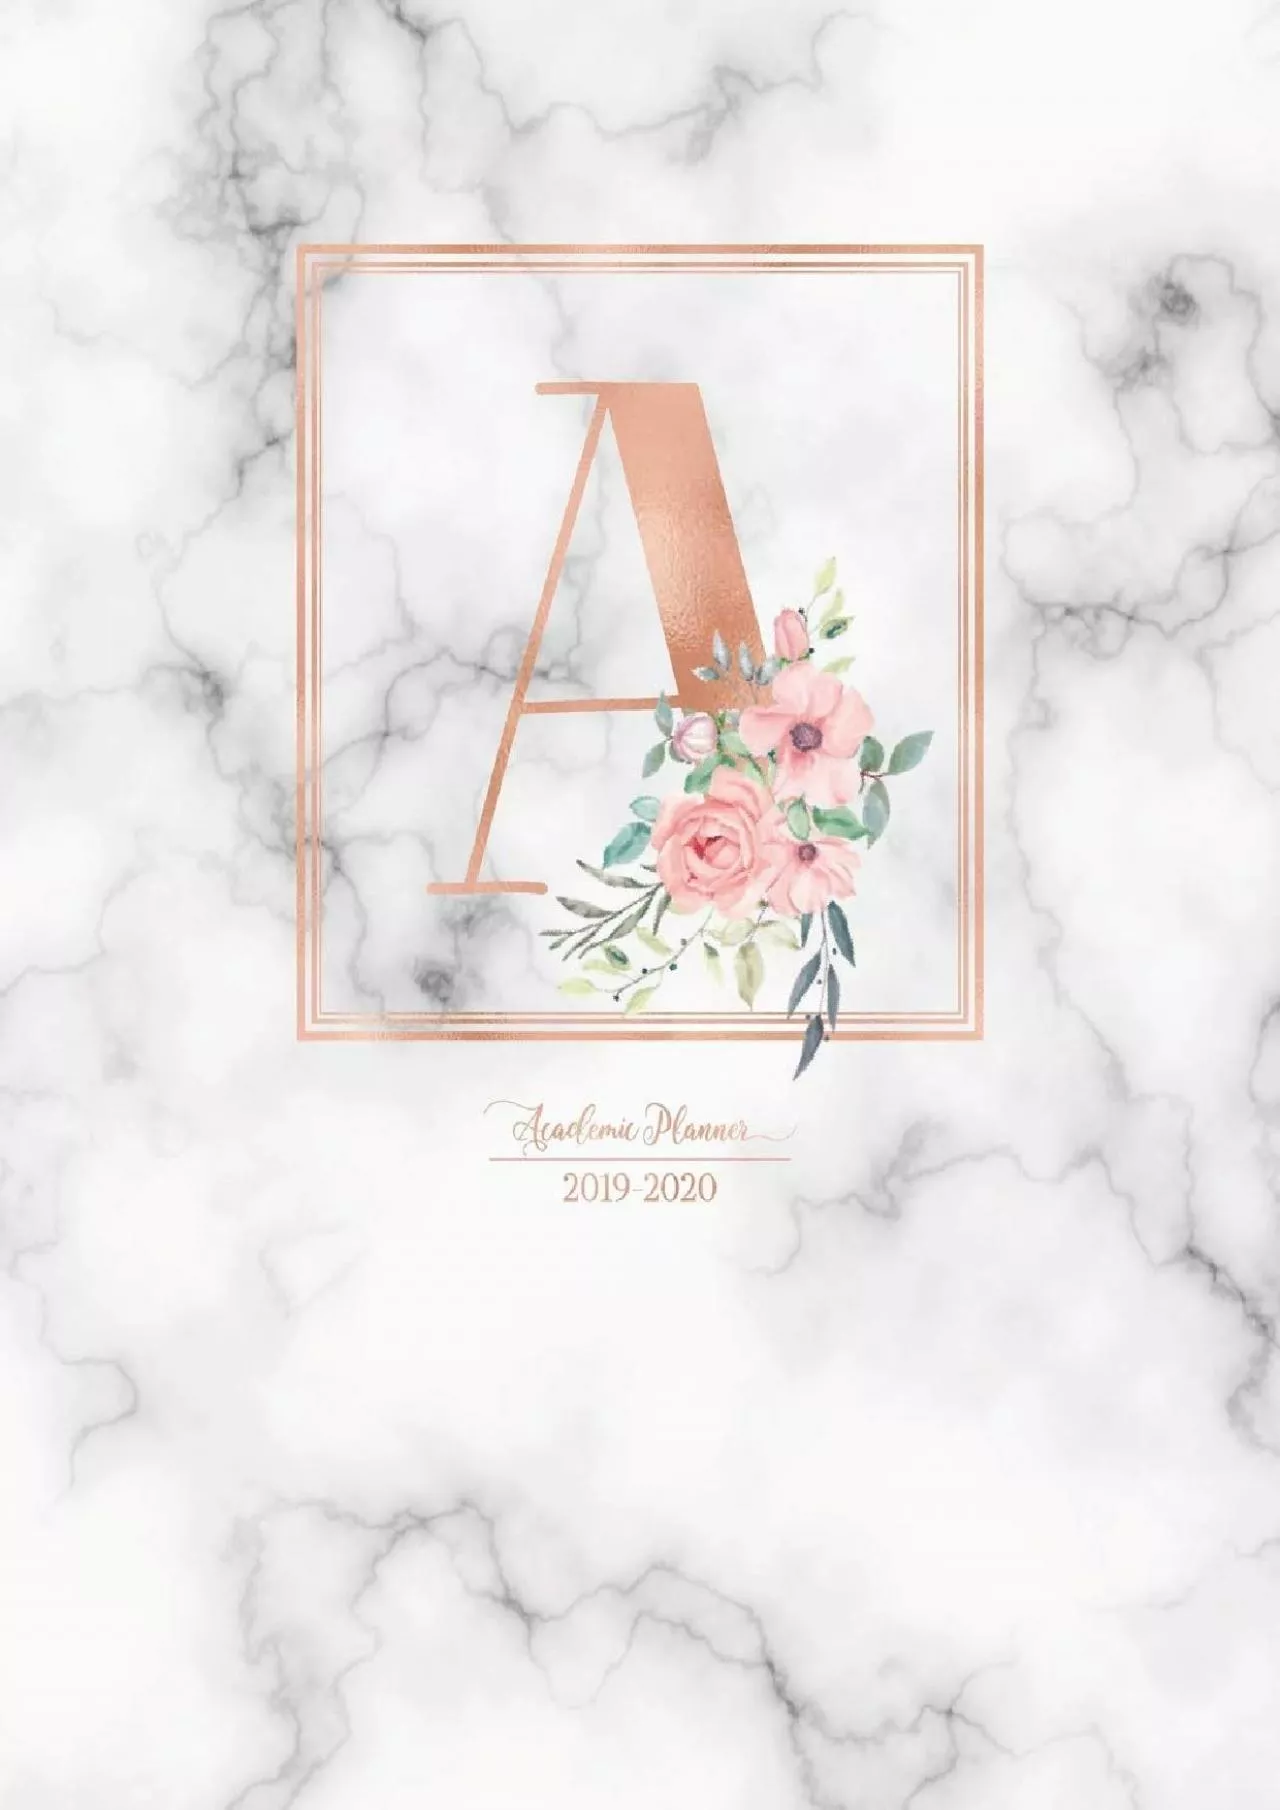 [DOWNLOAD] Academic Planner 2019-2020: Rose Gold Monogram Letter A with Pink Flowers over